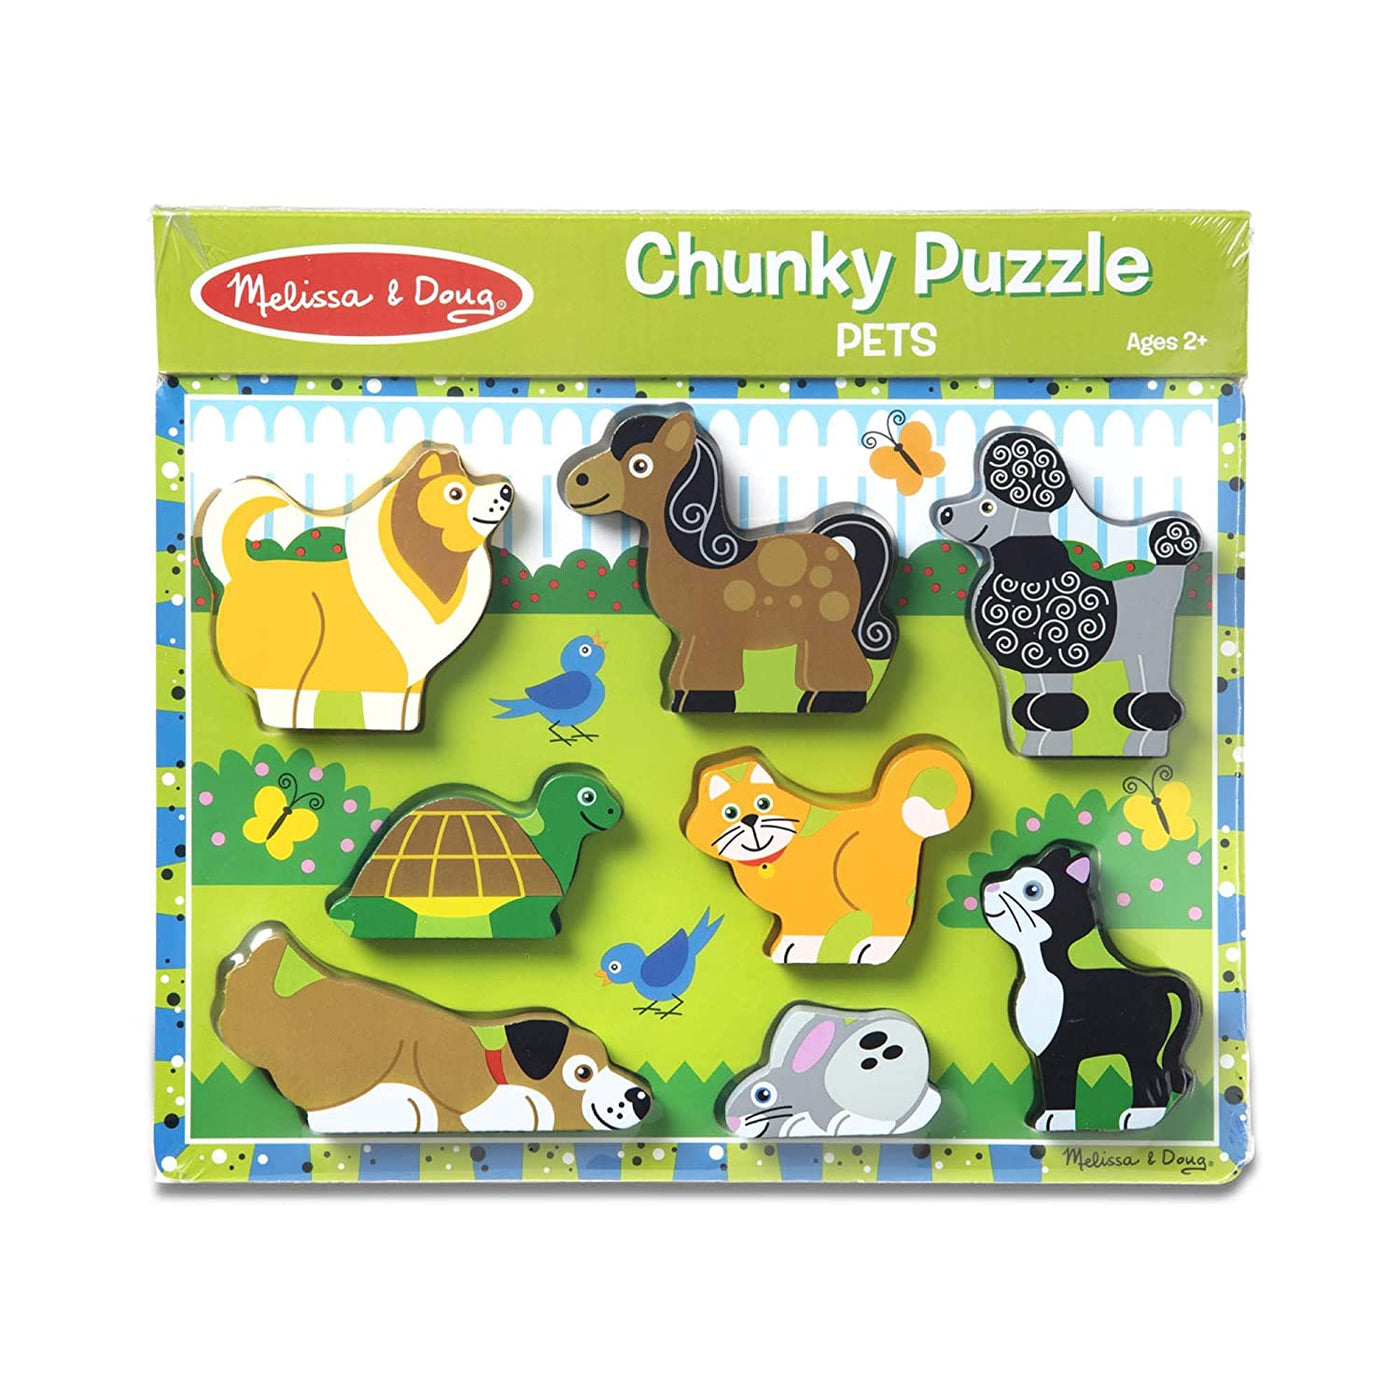 Pets: Chunky Puzzle